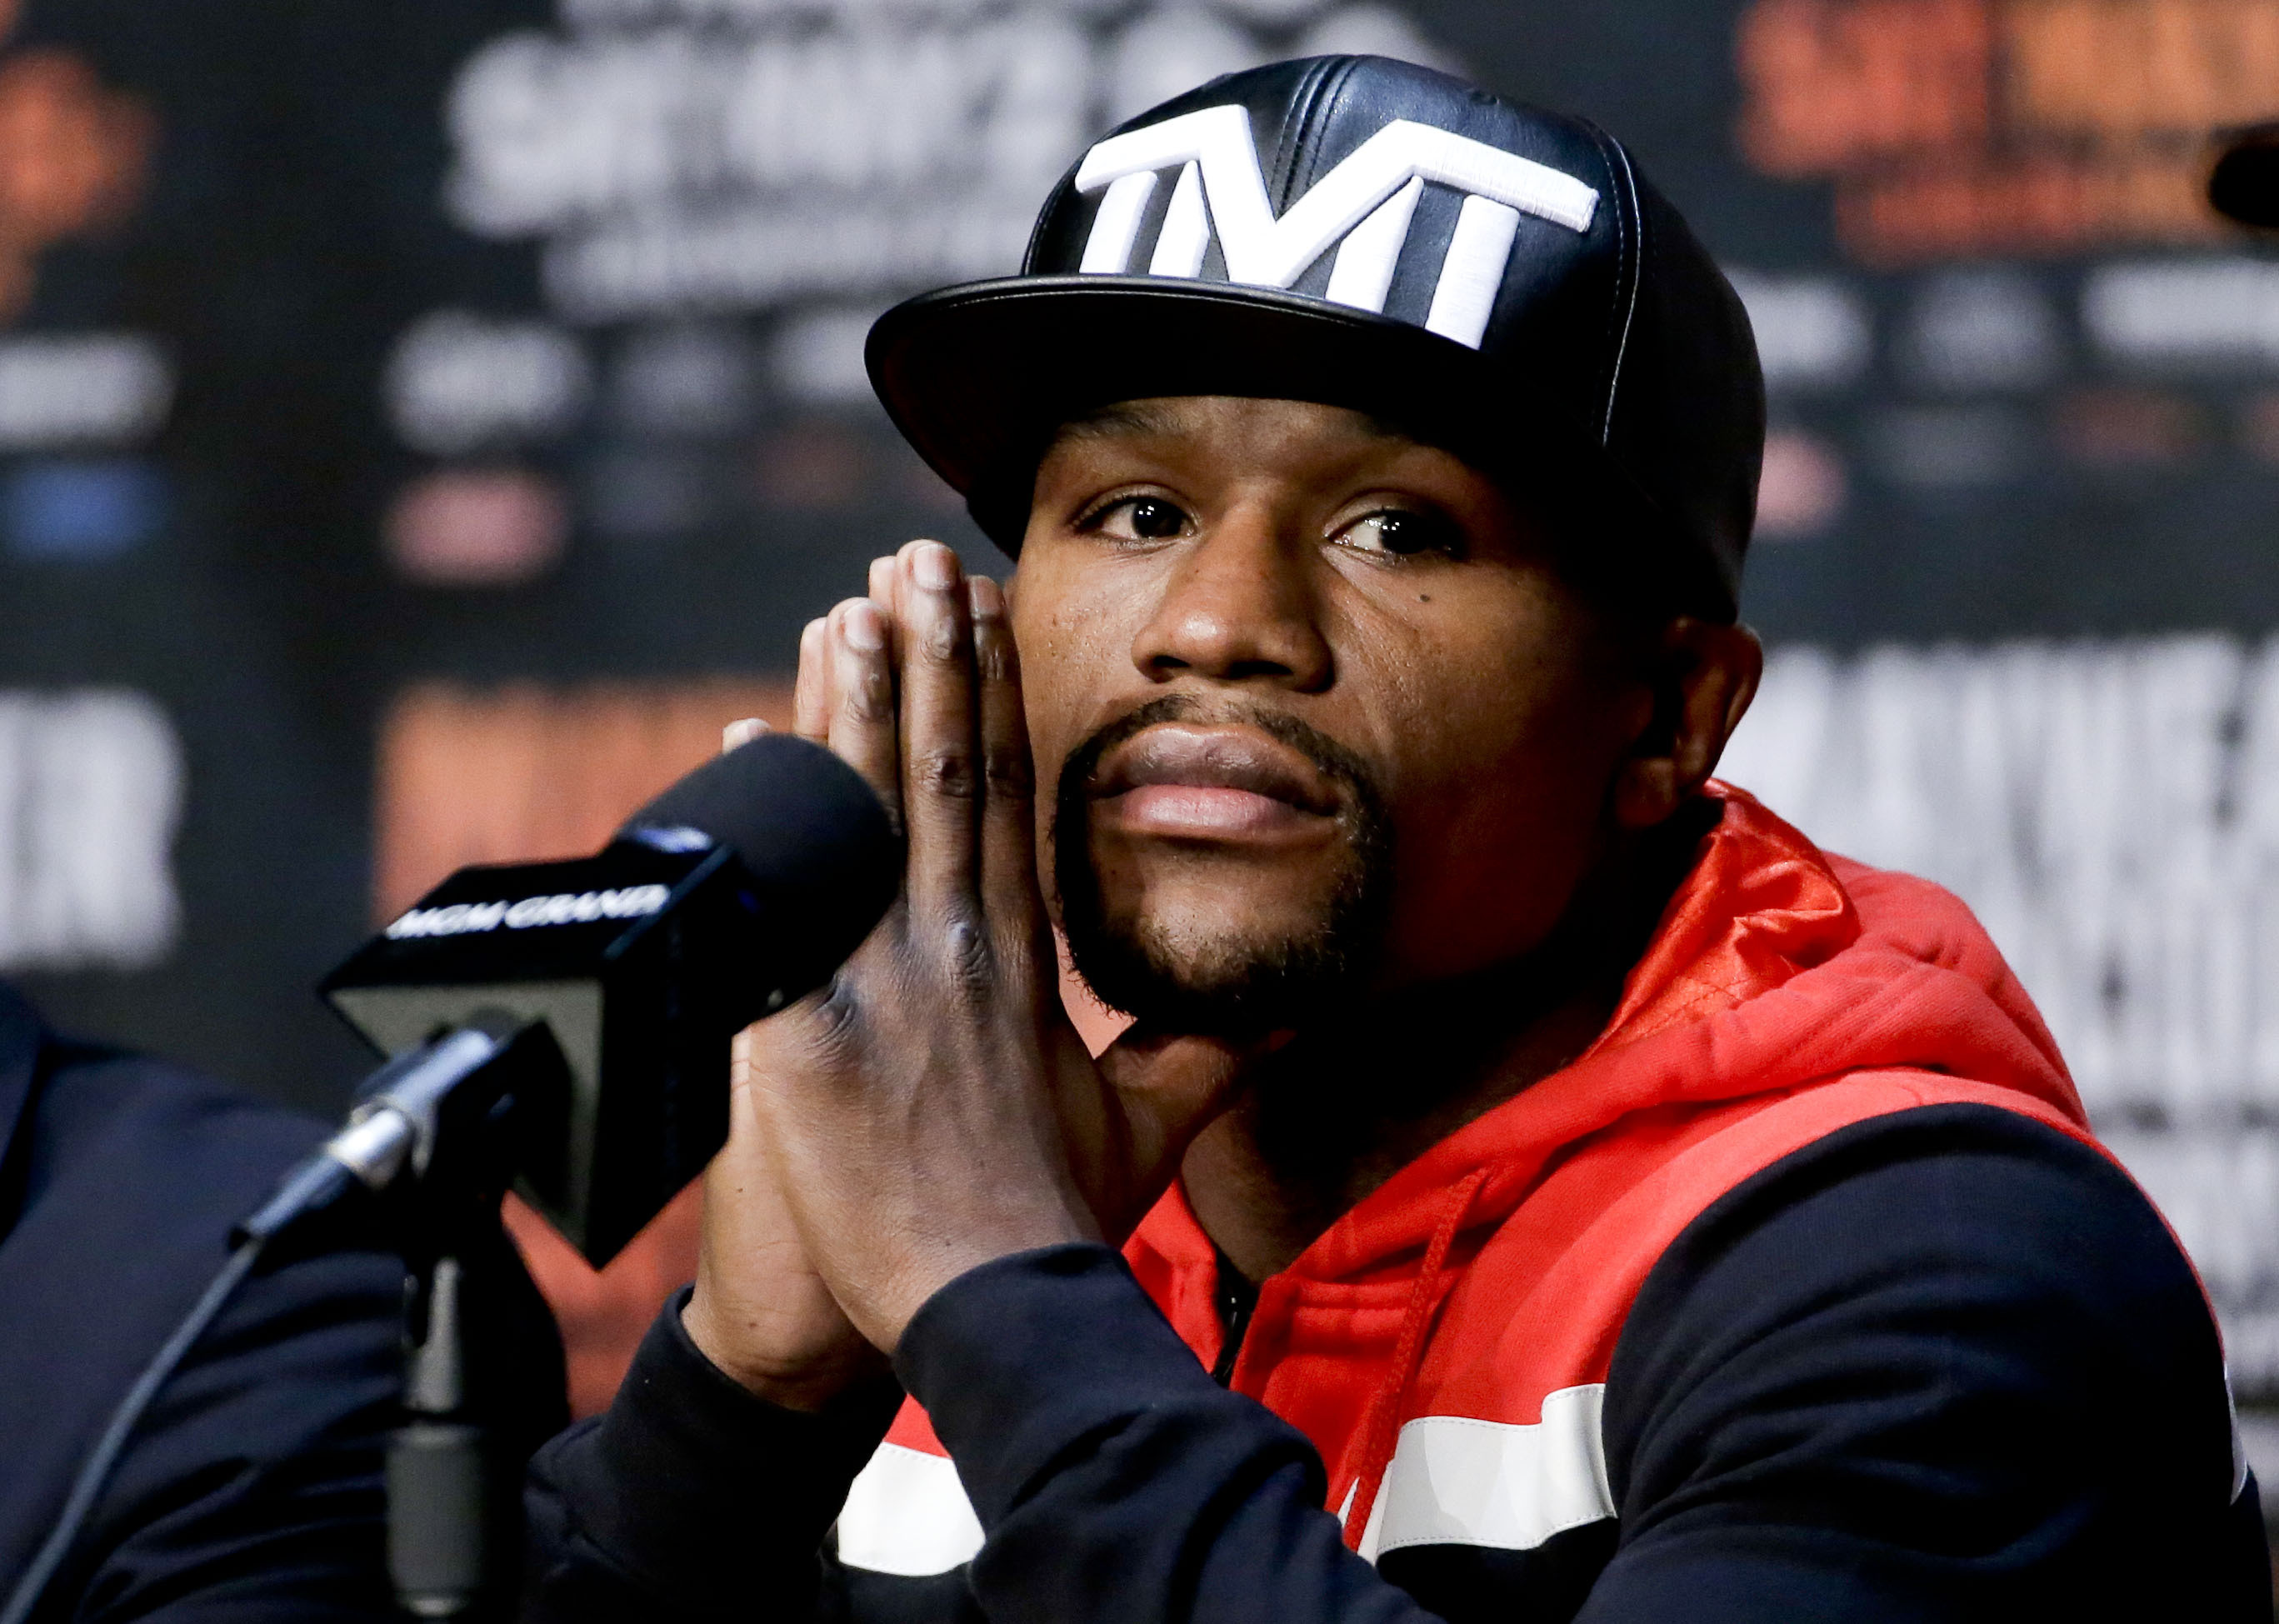 The 11 Most Important Statistics To Remember During Tonight's Mayweather-Pacquiao Fight